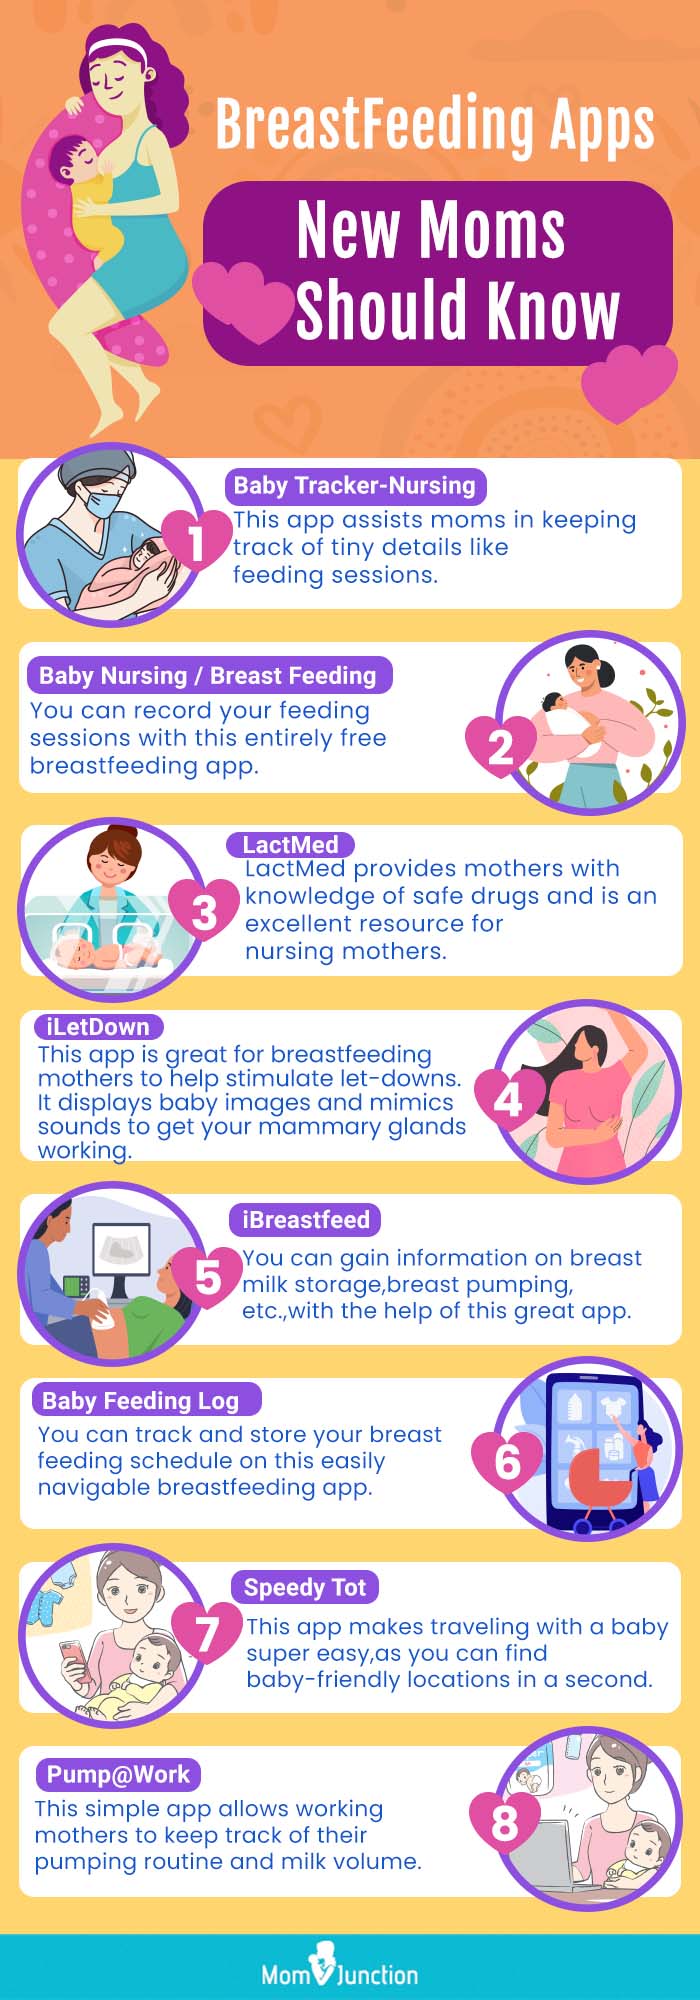 The BEST Breastfeeding Must Haves - Diary of a Fit Mommy